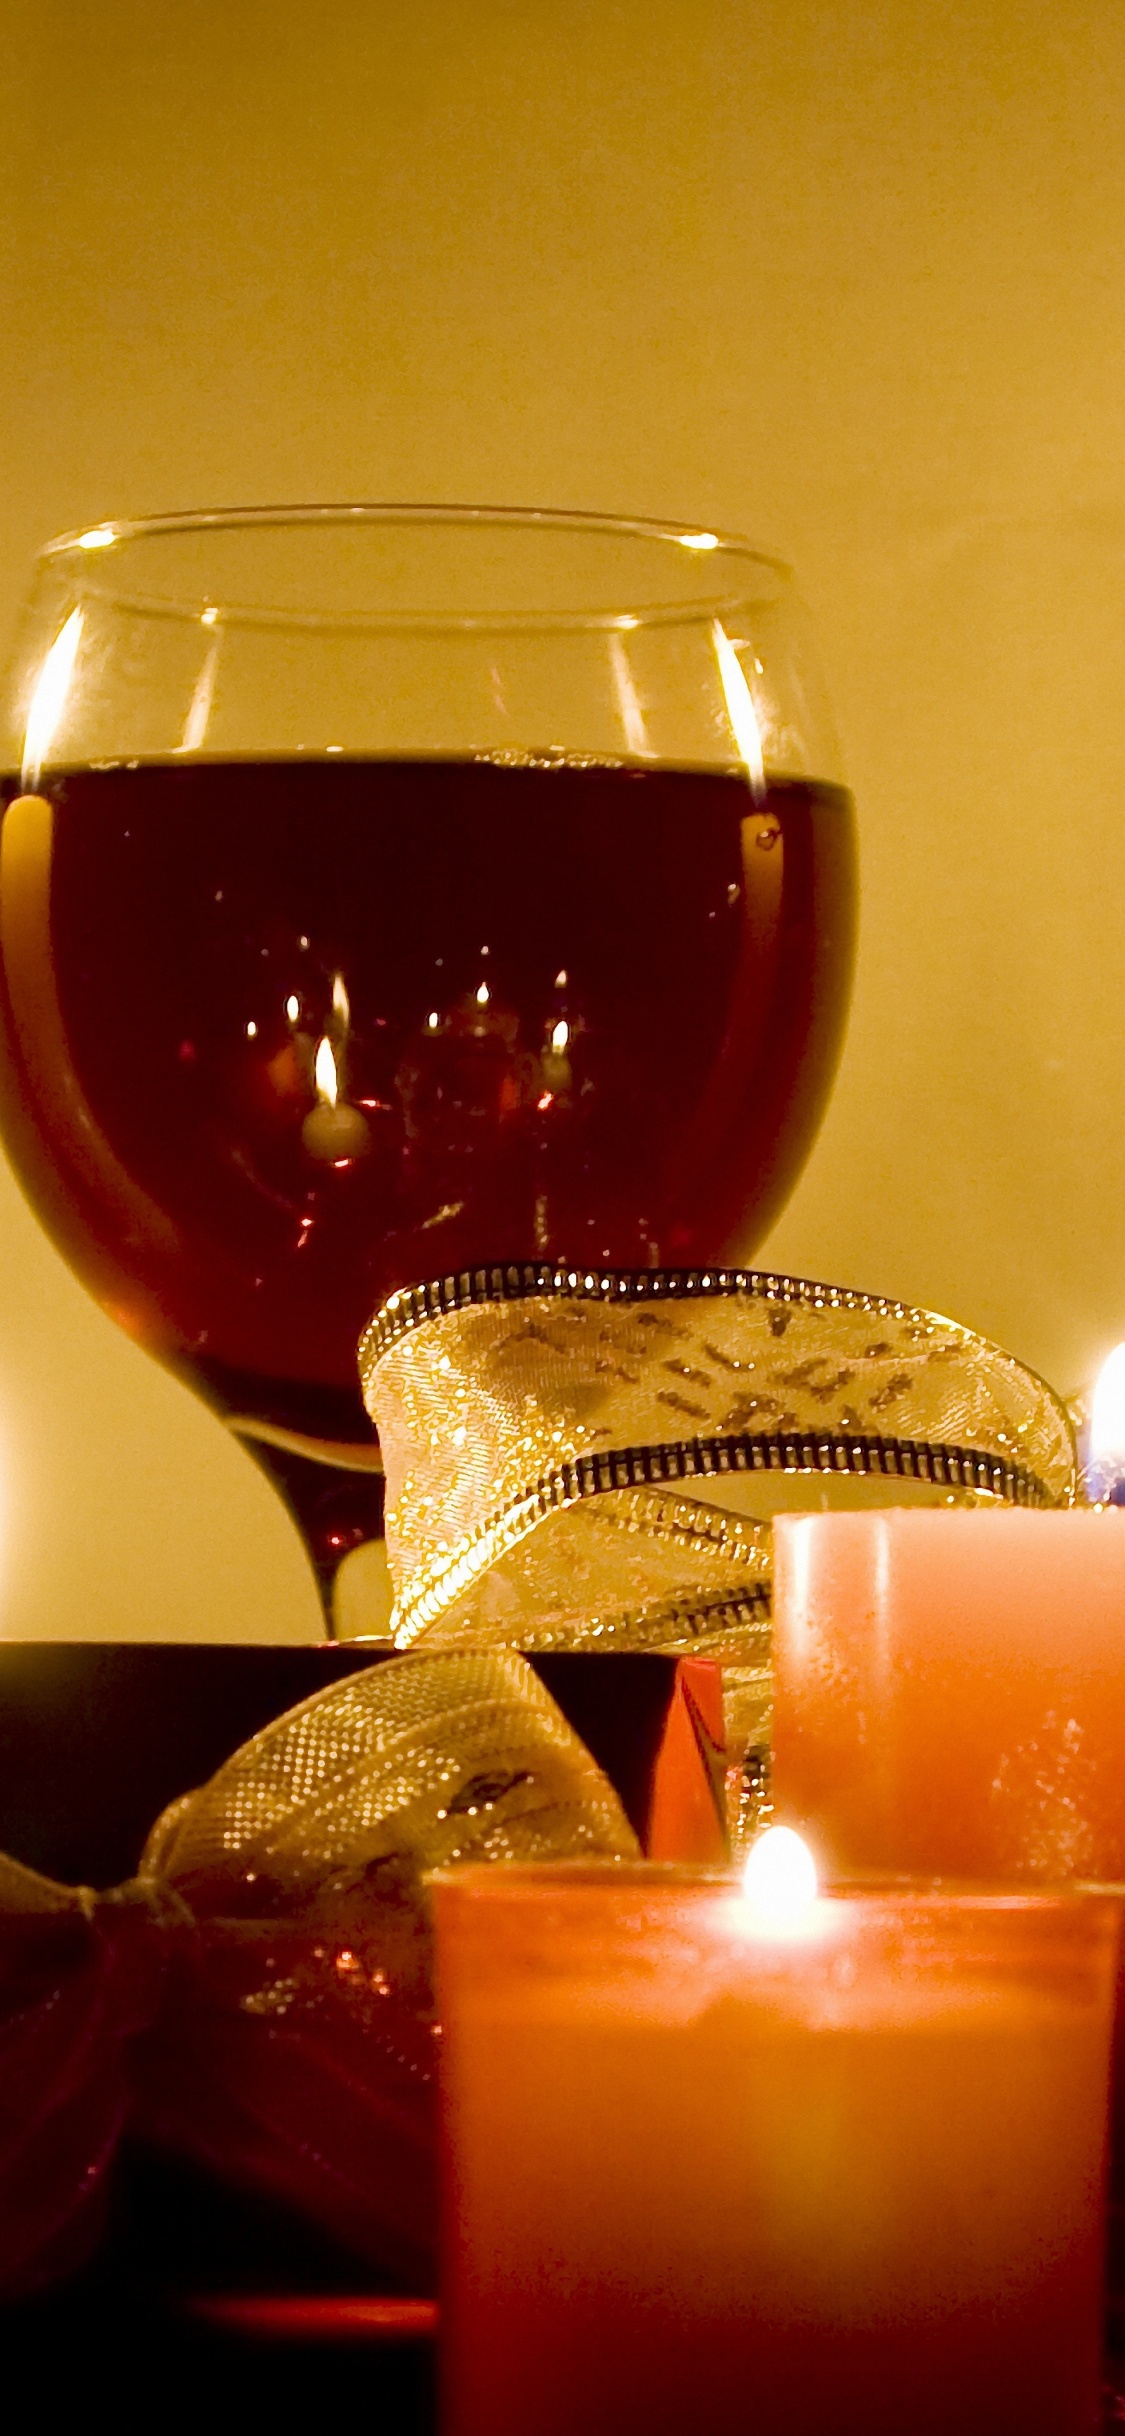 Wine, Candle, Lighting, Wax, Still Life. Wallpaper in 1125x2436 Resolution